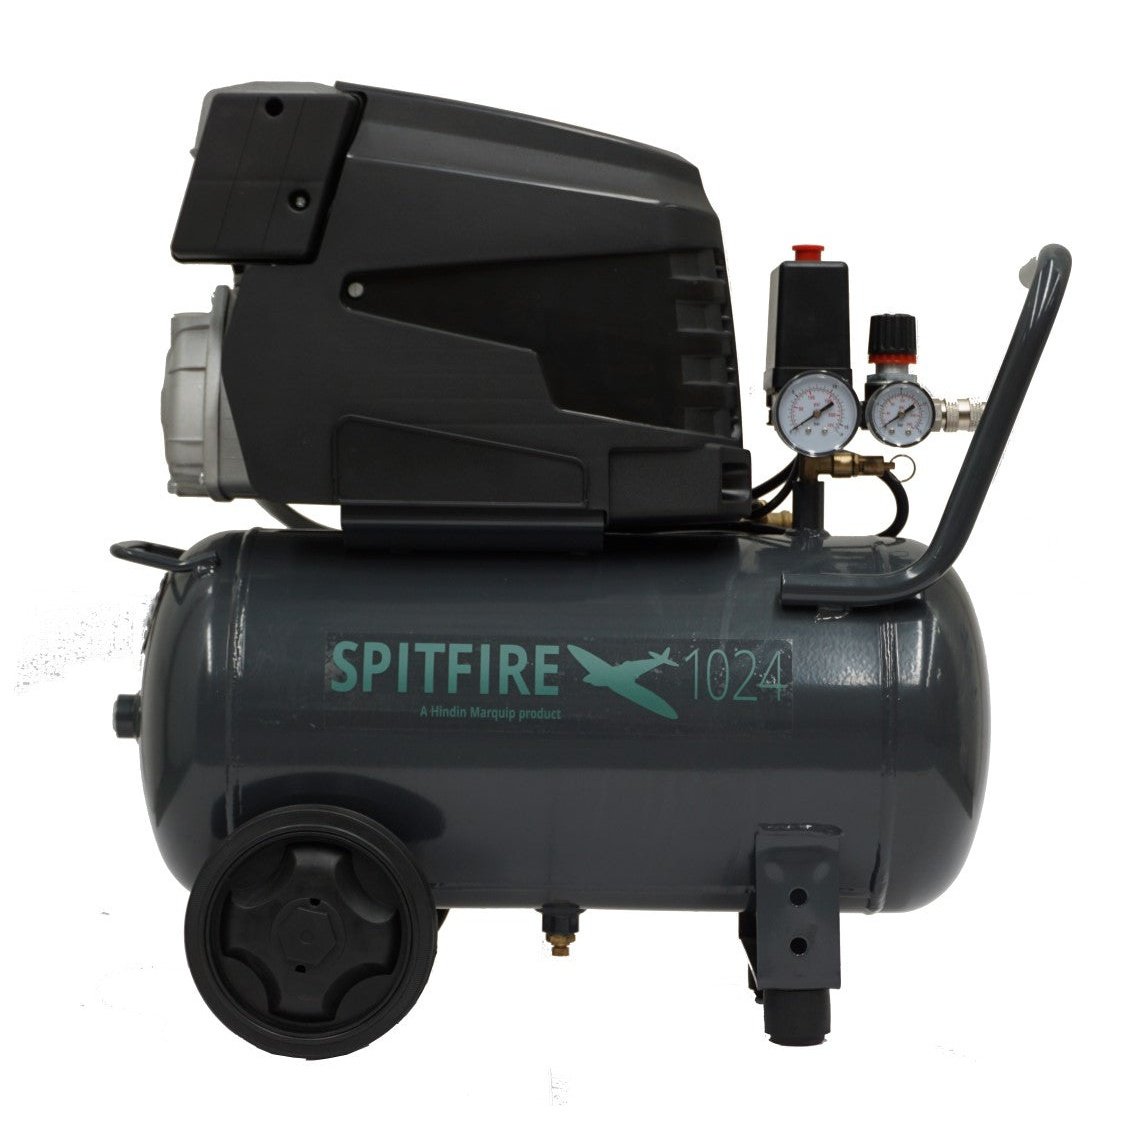 Hindin Spitfire 1024 2.5HP 24L Direct Drive Single Phase Compressor tool-junction-nz